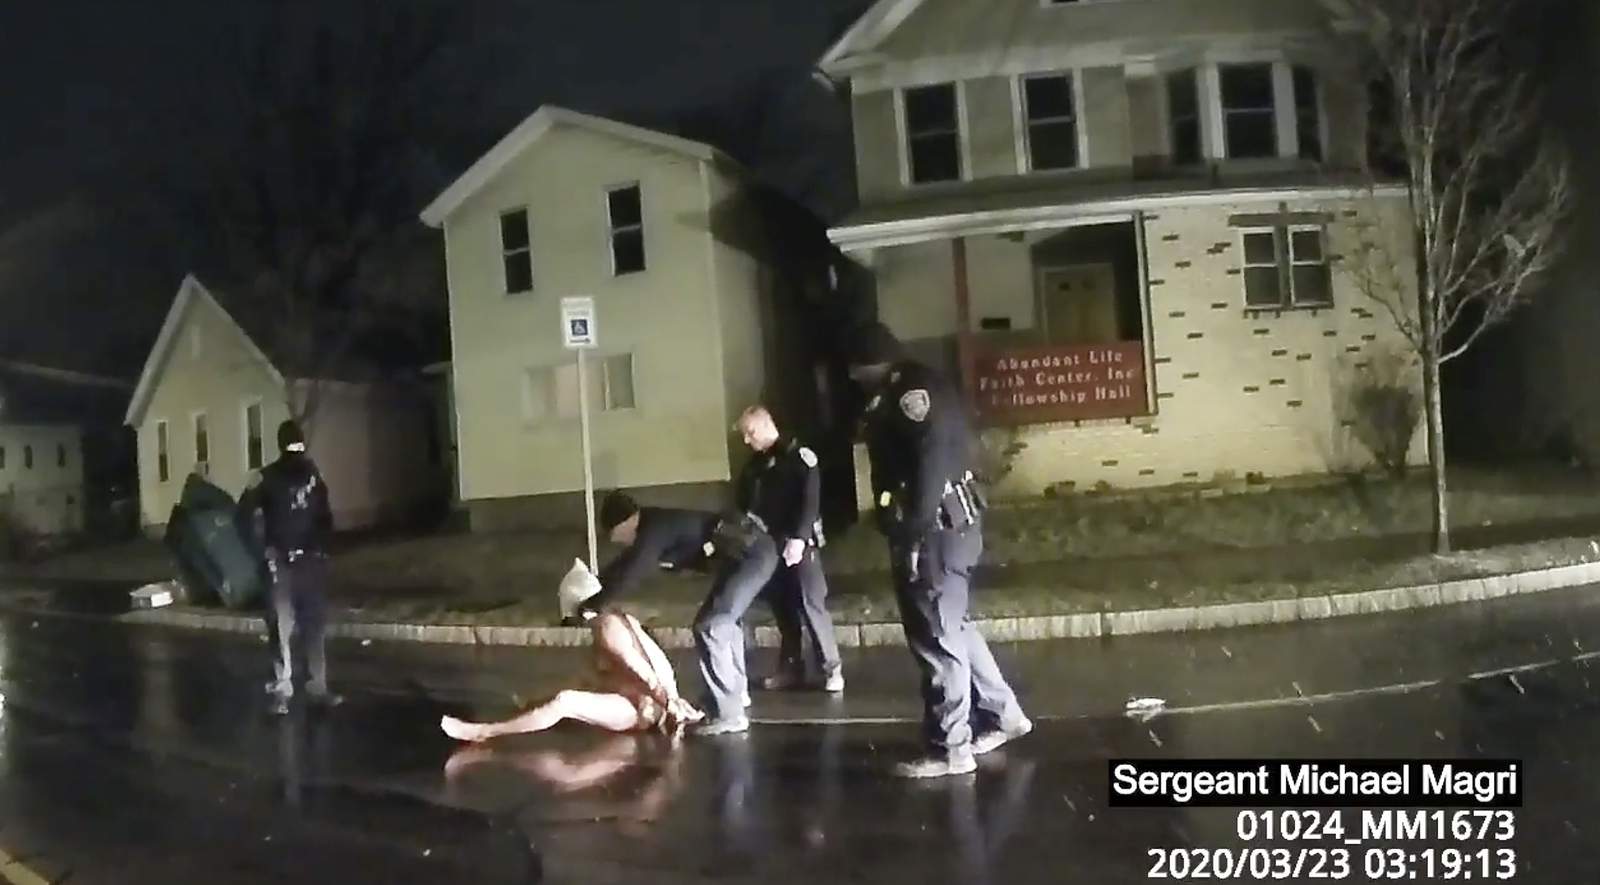 Video in Black man's suffocation shows cops put hood on him